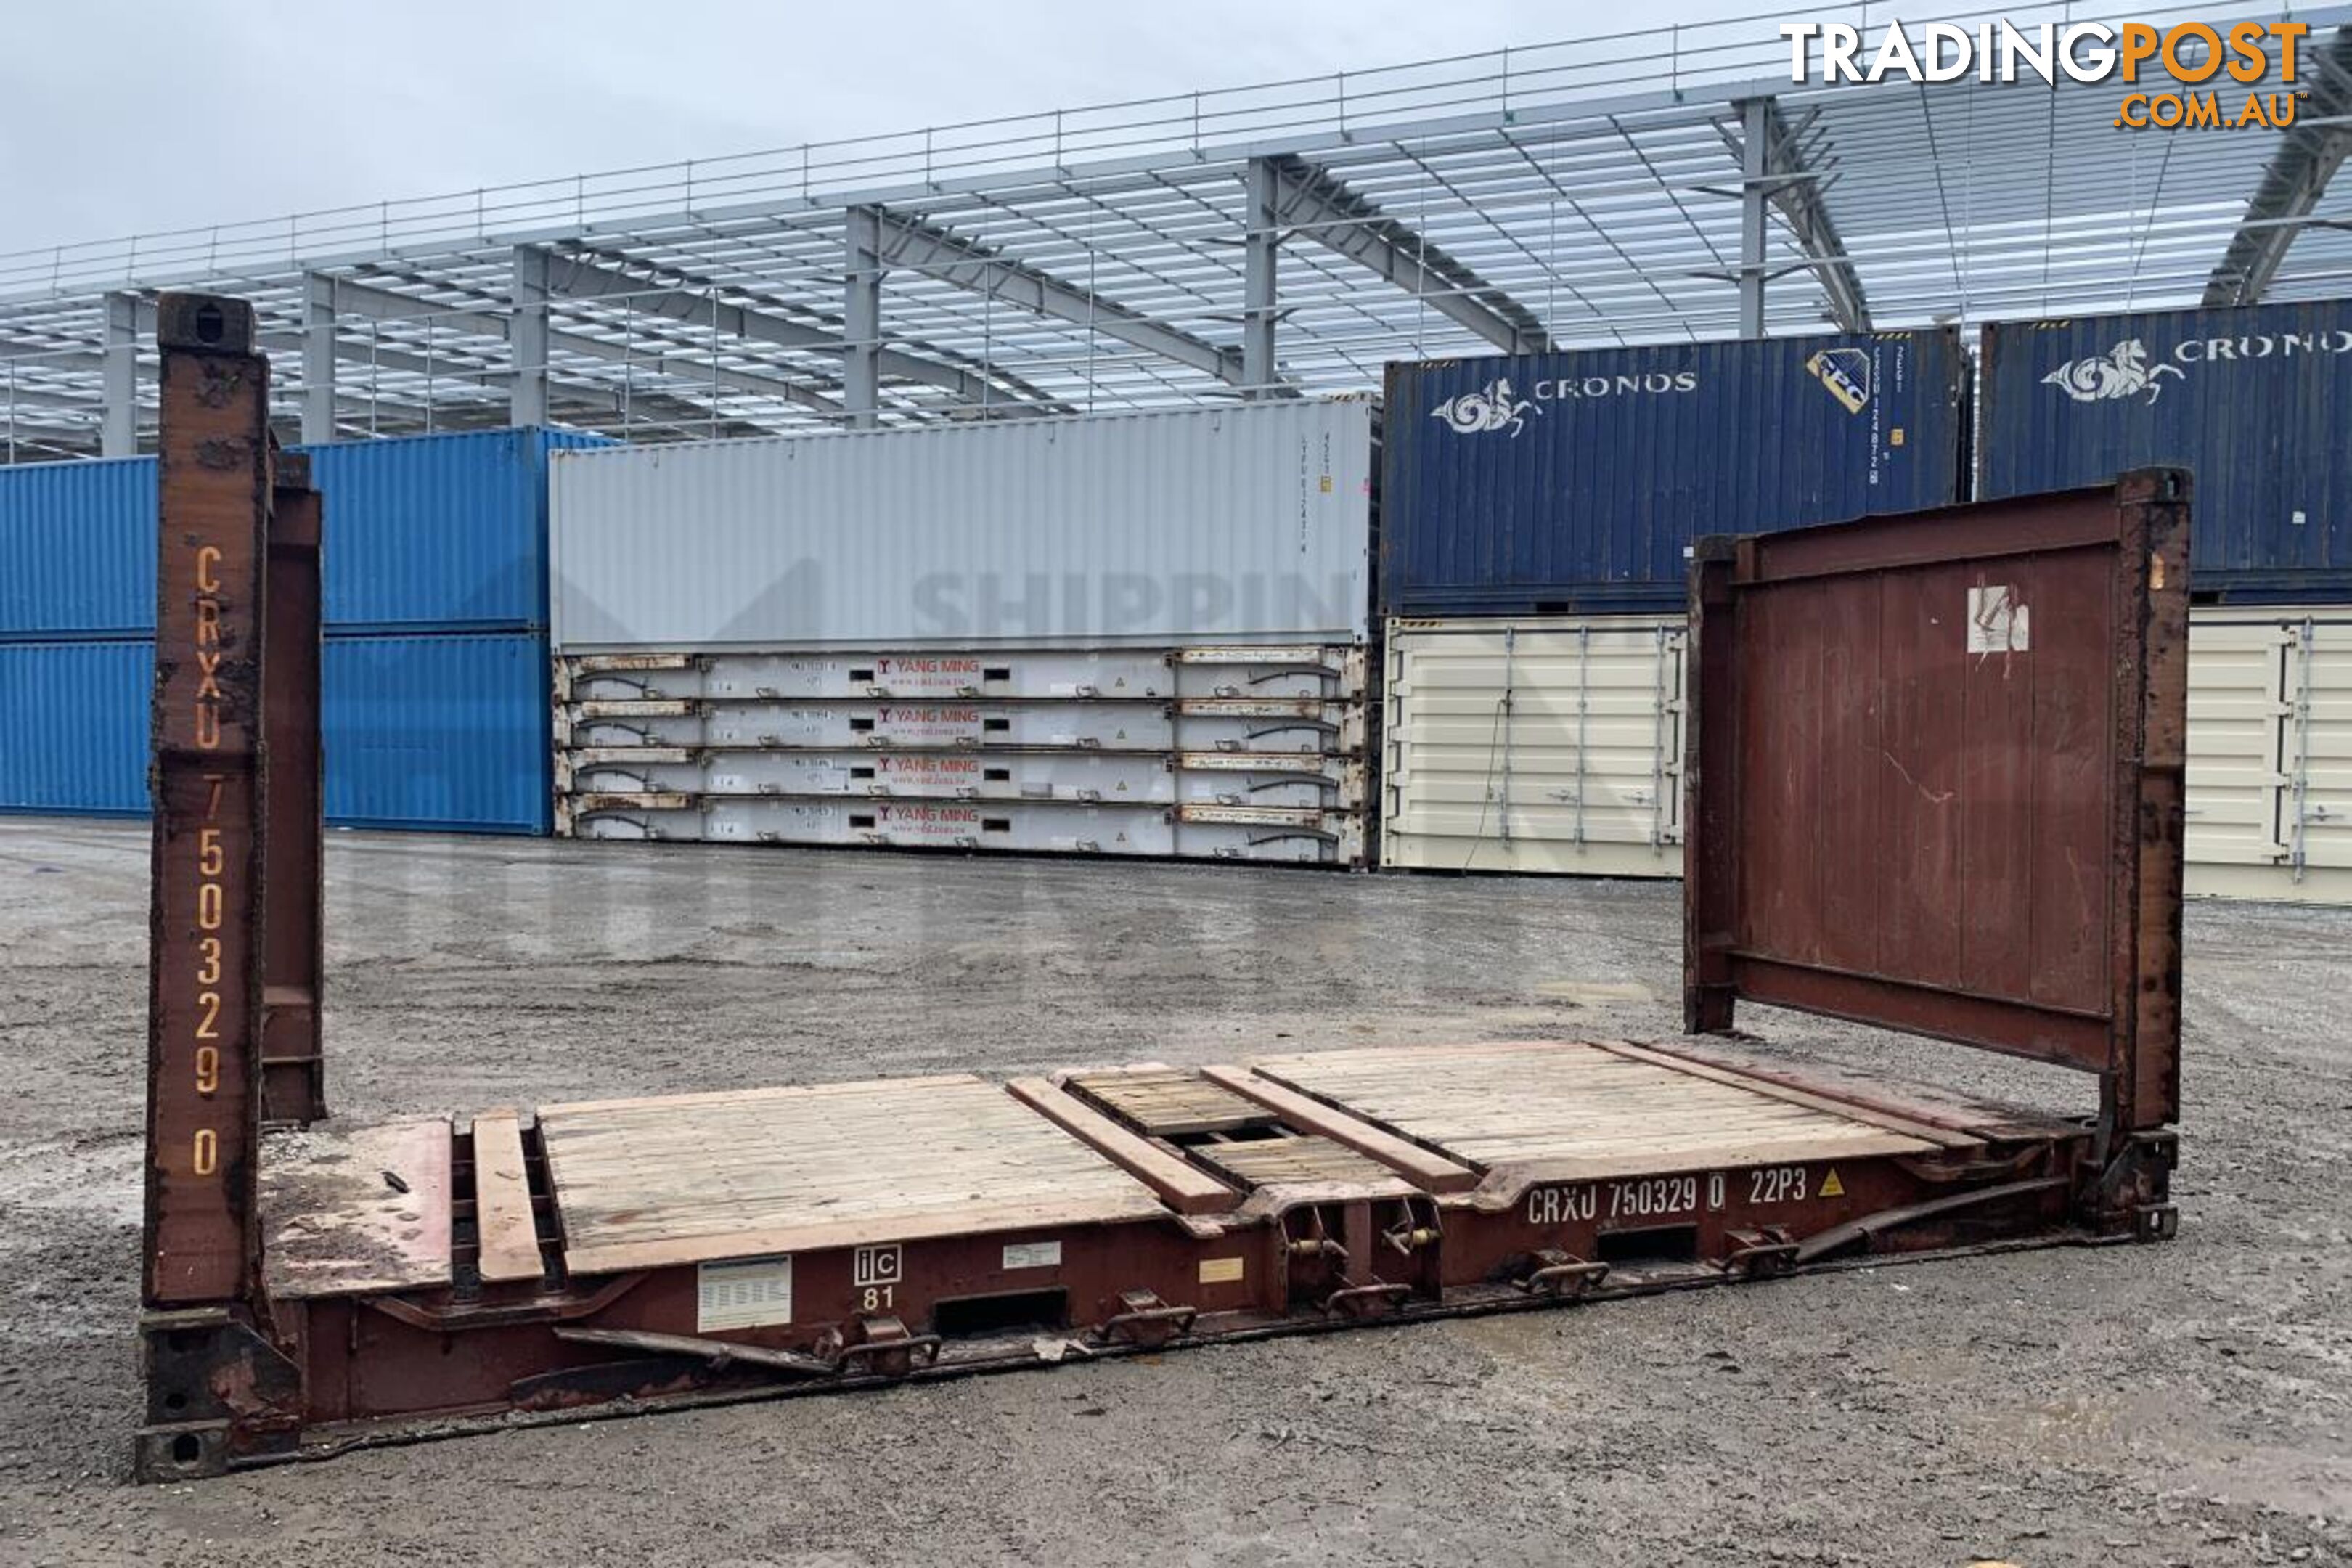 20' FLAT RACK SHIPPING CONTAINER (WITH COLLAPSIBLE ENDS) - in Brisbane